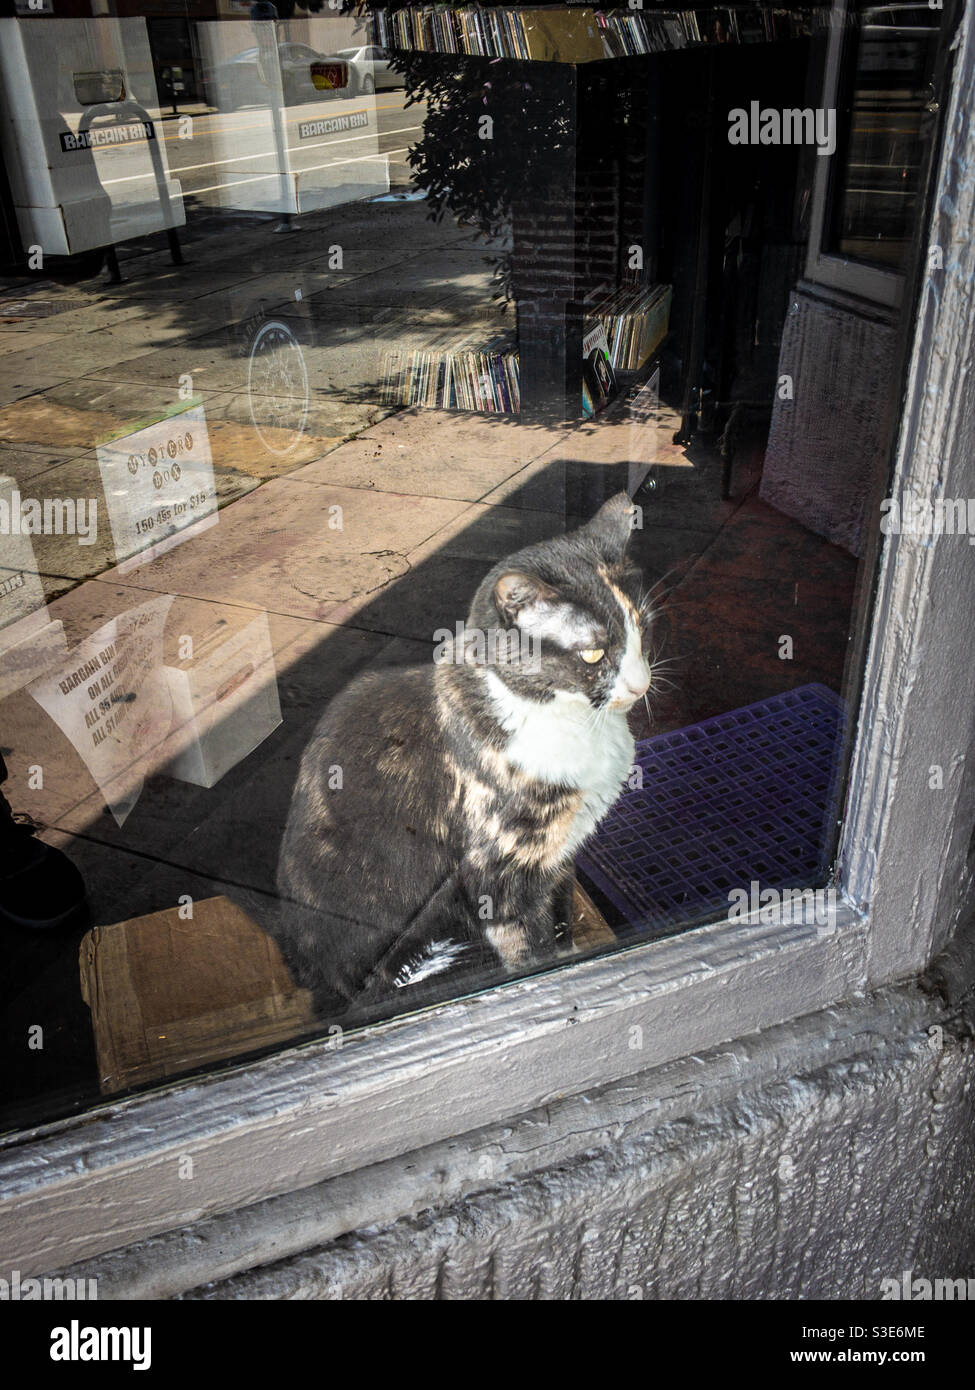 Kitty cat behind glass at record store Stock Photo